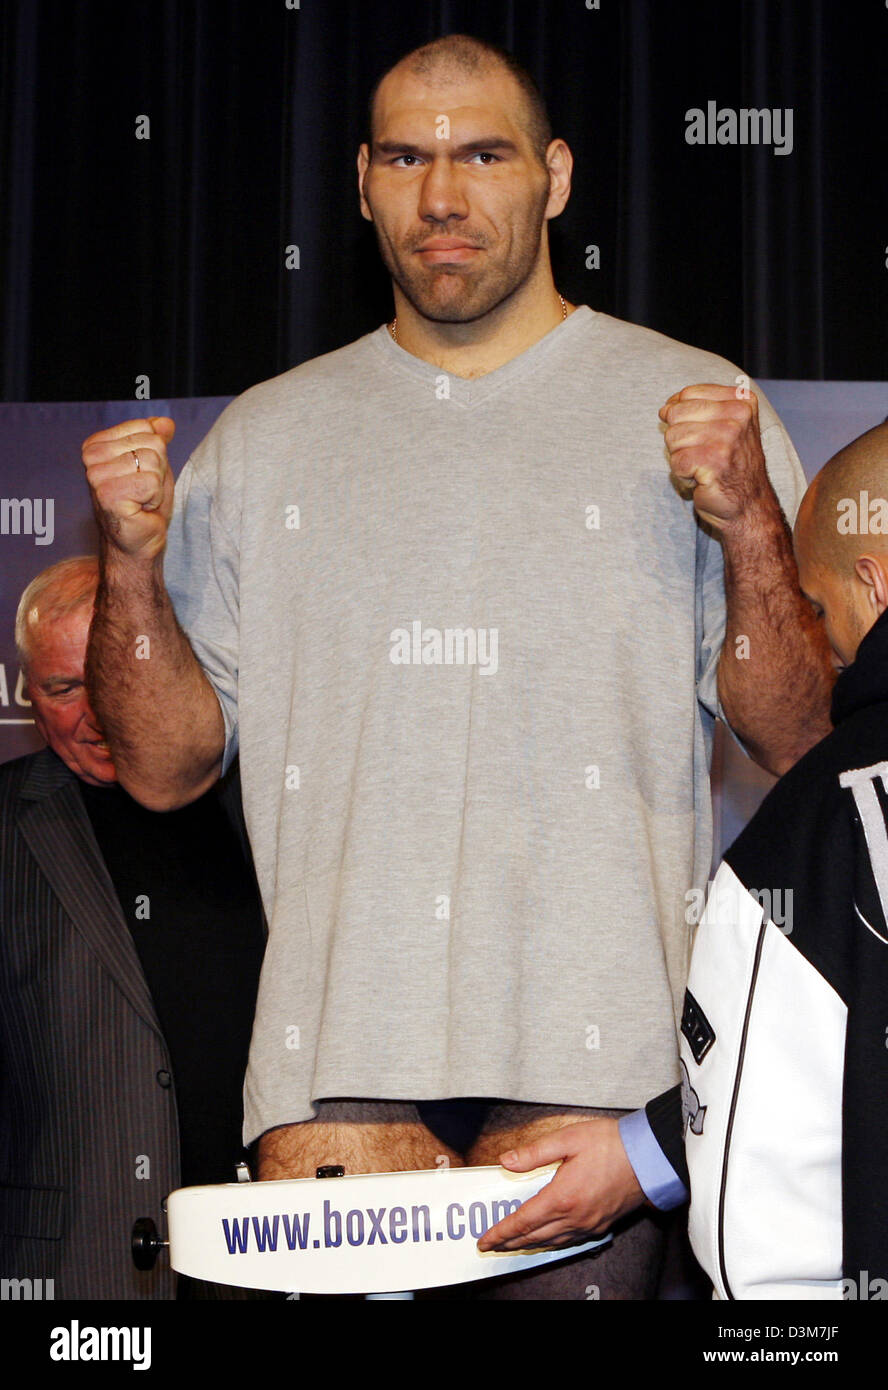 (dpa) -  Russian boxer Nikolai Valuev raise their fists as he stands on the scale during the public weighing in Berlin, Friday, 16 December 2005. Valuev is going to challenge US heavyweight boxing world champion John Ruiz in the WBA title bout in Berlin, Saturday, 17 December 2005. Photo: Bernd Settnik Stock Photo